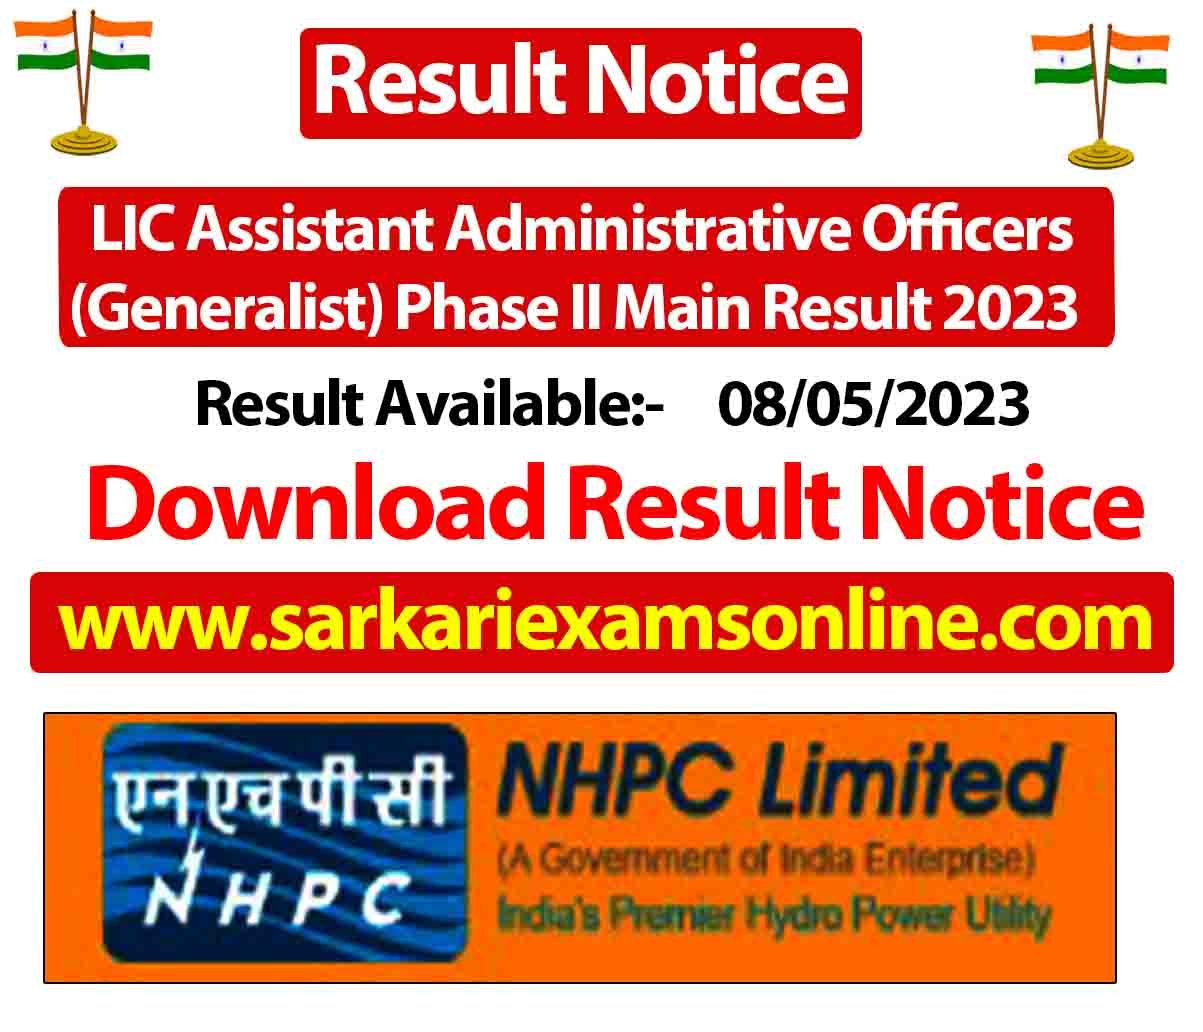 LIC Assistant Administrative Officers Generalist Phase II Main Result 2023 